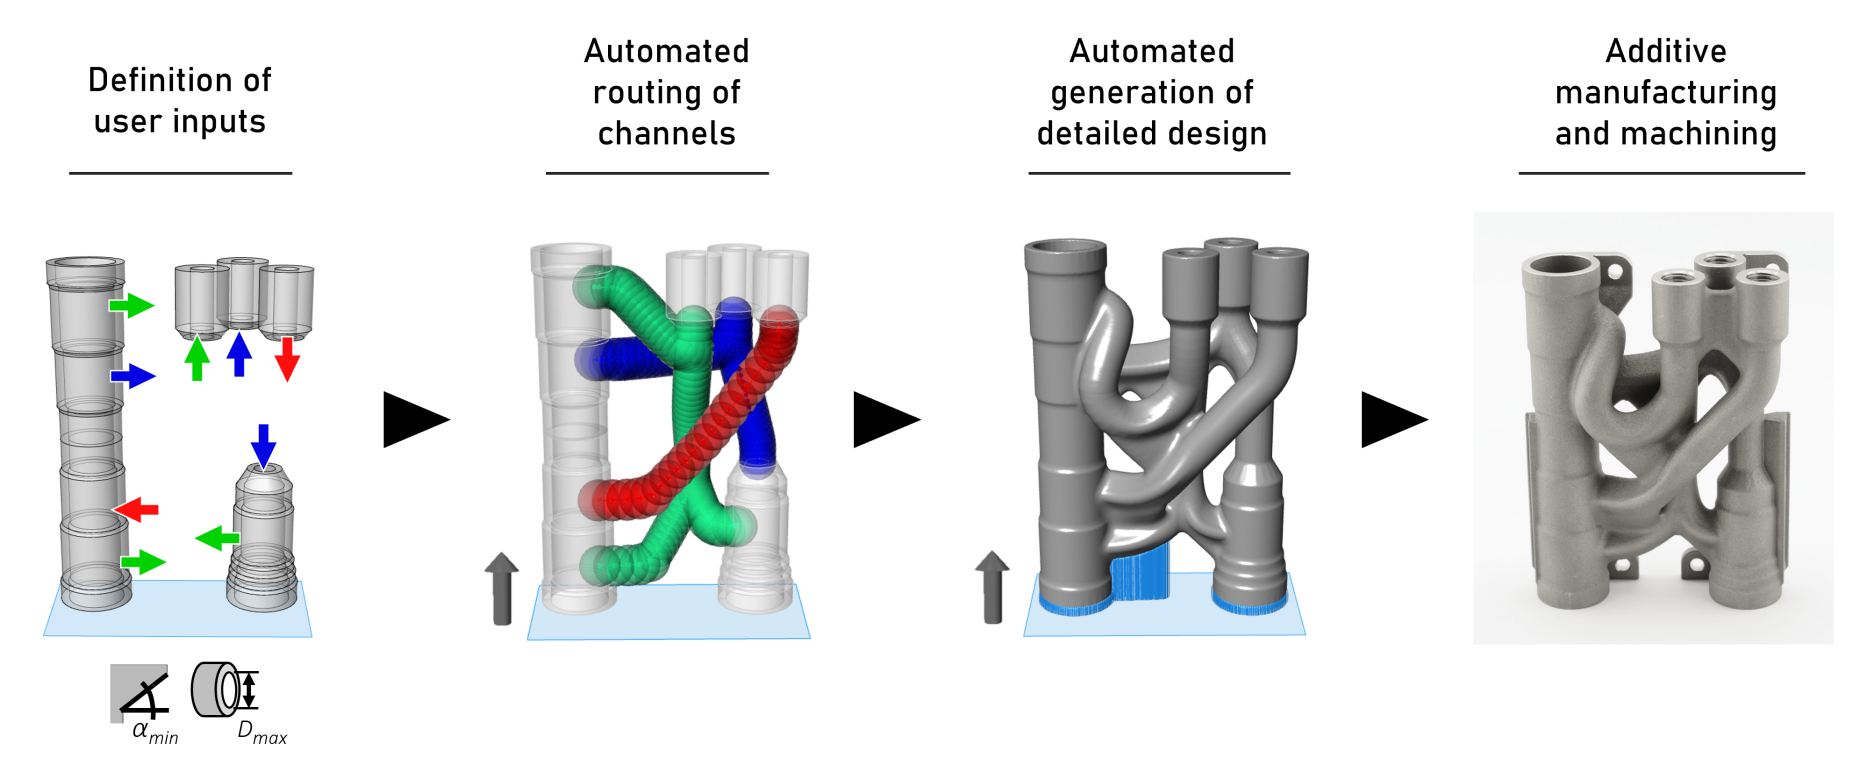 Enlarged view: Digital design and additive manufacturing of hydraulic manifolds with automated consideration of manufacturing constraints